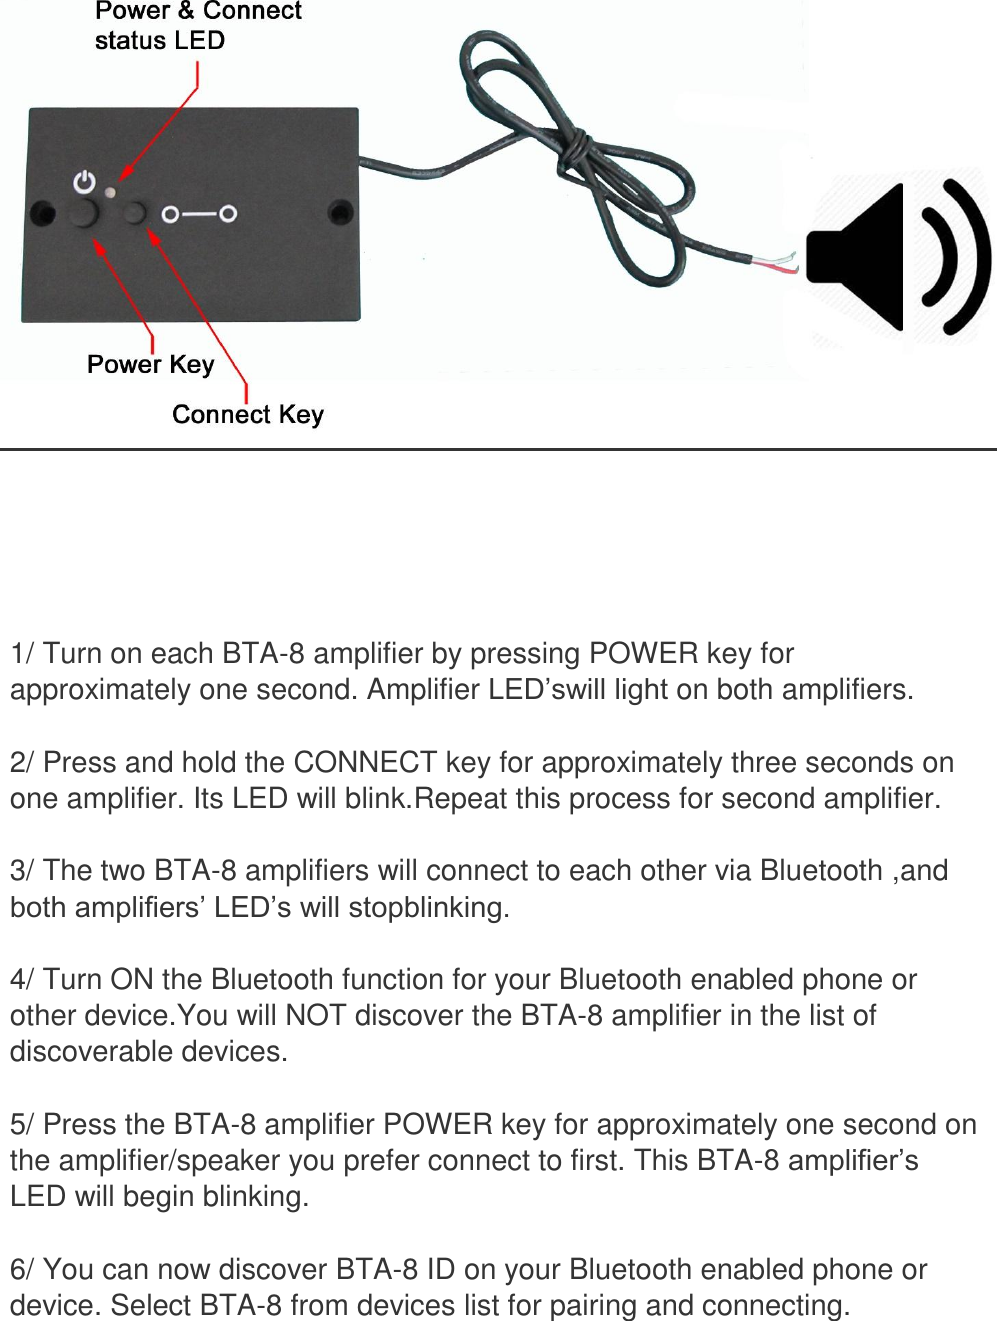          1/ Turn on each BTA-8 amplifier by pressing POWER key for approximately one second. Amplifier LED’swill light on both amplifiers.  2/ Press and hold the CONNECT key for approximately three seconds on one amplifier. Its LED will blink.Repeat this process for second amplifier.  3/ The two BTA-8 amplifiers will connect to each other via Bluetooth ,and both amplifiers’ LED’s will stopblinking.  4/ Turn ON the Bluetooth function for your Bluetooth enabled phone or other device.You will NOT discover the BTA-8 amplifier in the list of discoverable devices.  5/ Press the BTA-8 amplifier POWER key for approximately one second on the amplifier/speaker you prefer connect to first. This BTA-8 amplifier’s LED will begin blinking.  6/ You can now discover BTA-8 ID on your Bluetooth enabled phone or device. Select BTA-8 from devices list for pairing and connecting. 